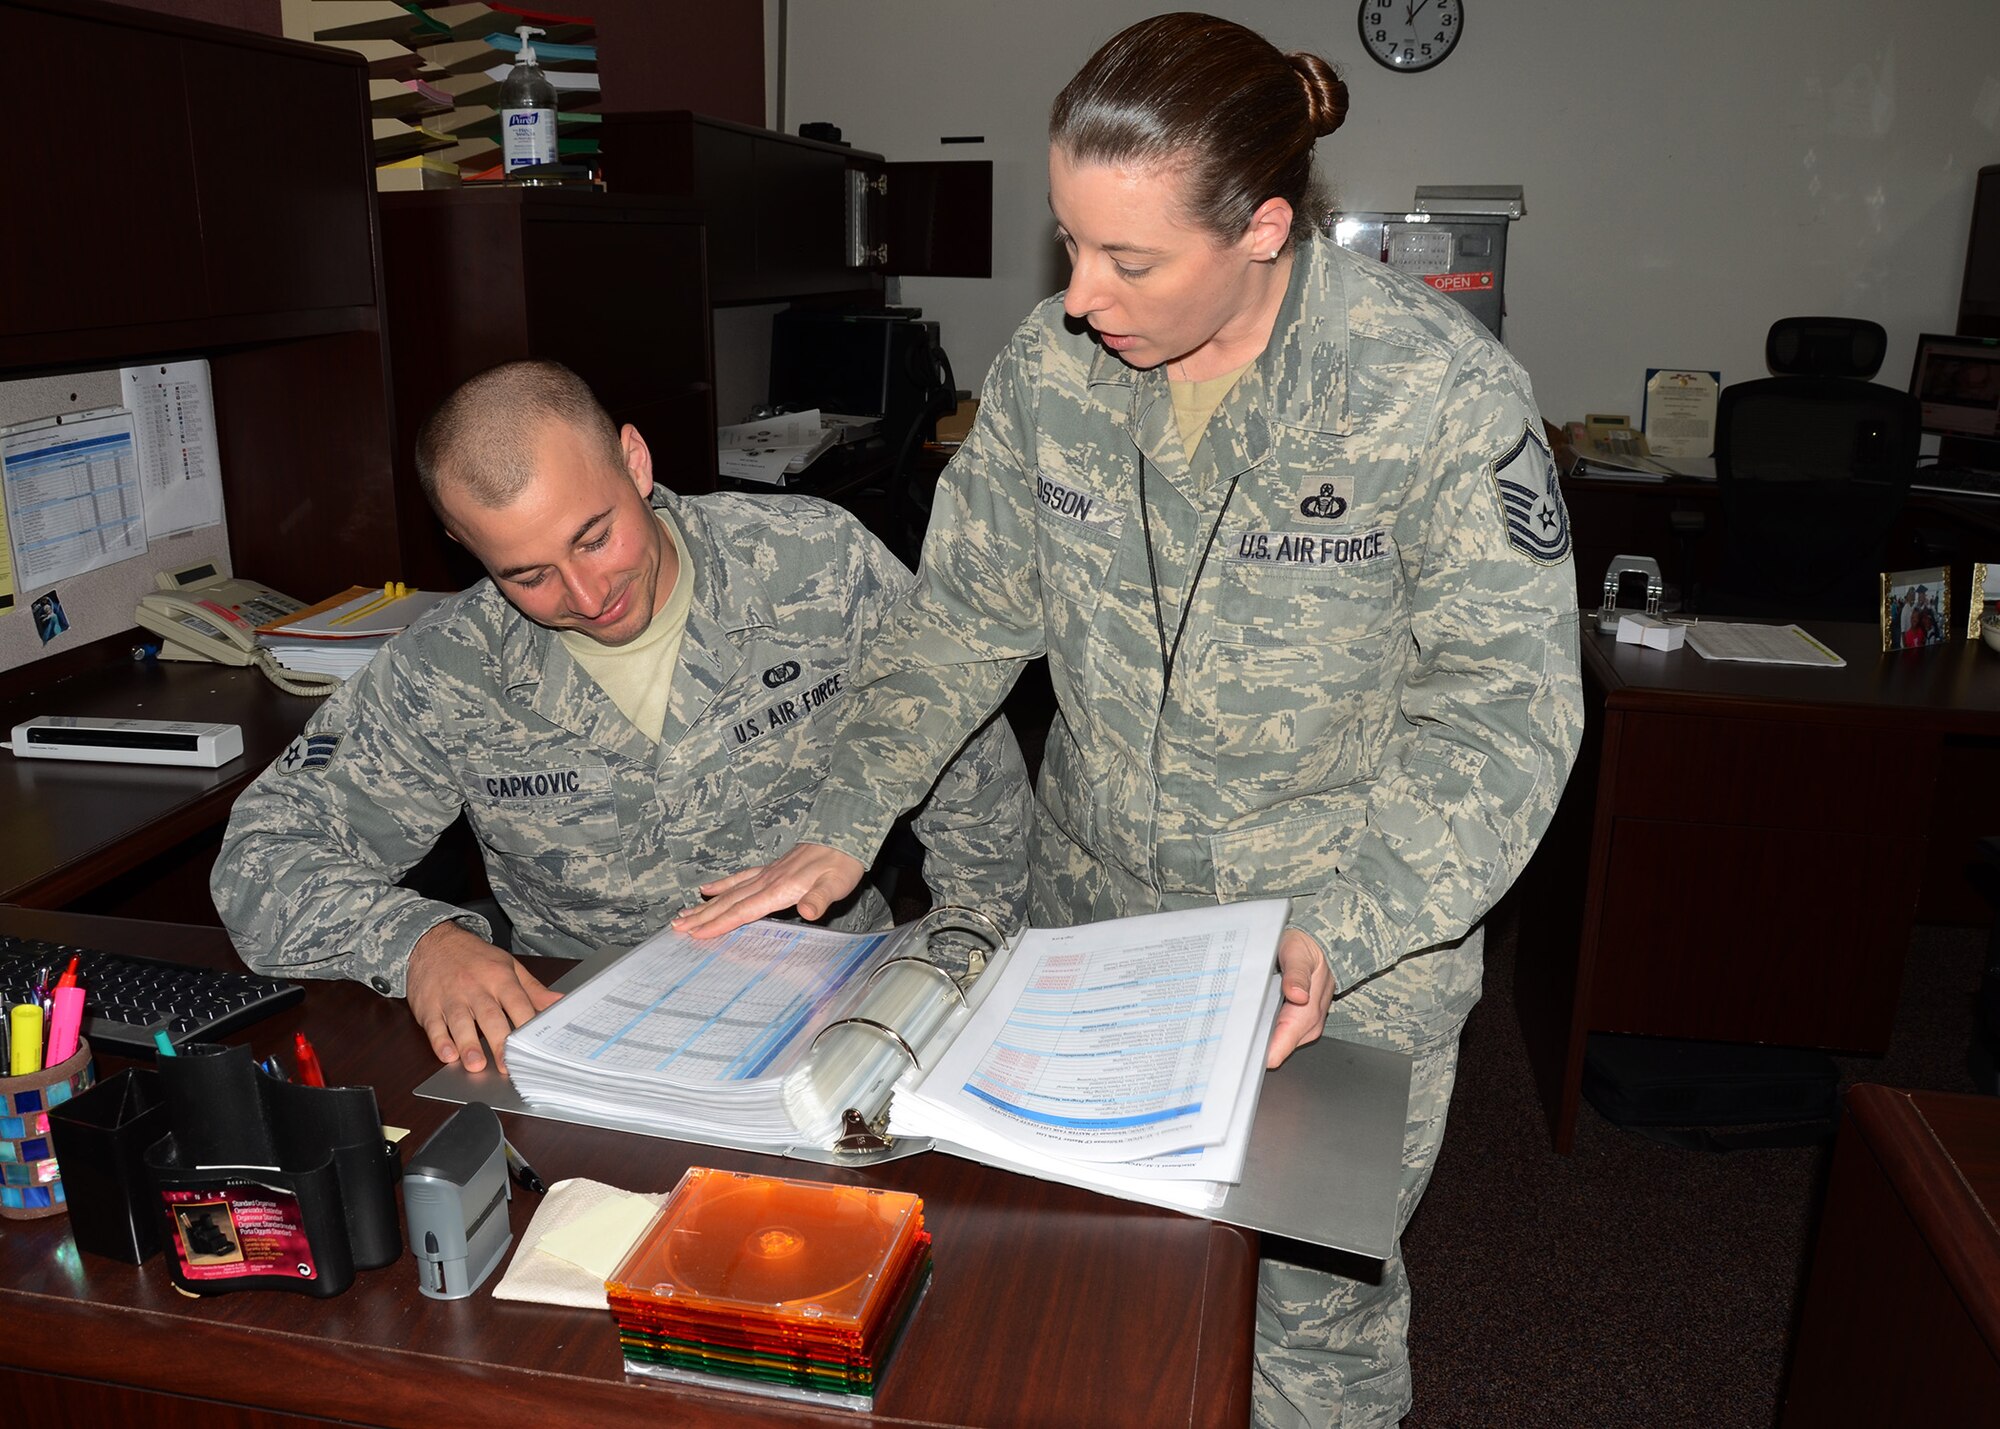 Mentoring is a critical component of the Air Force’s Force Development Construct. It is normally a relationship in which a person with greater experience and wisdom guides another person to develop both personally and professionally.   For more information and to register:  https://afvec.langley.af.mil/myvector/Home/Mentoring   (U.S. Air National Guard photo by Airman 1st Class Halley Burgess)